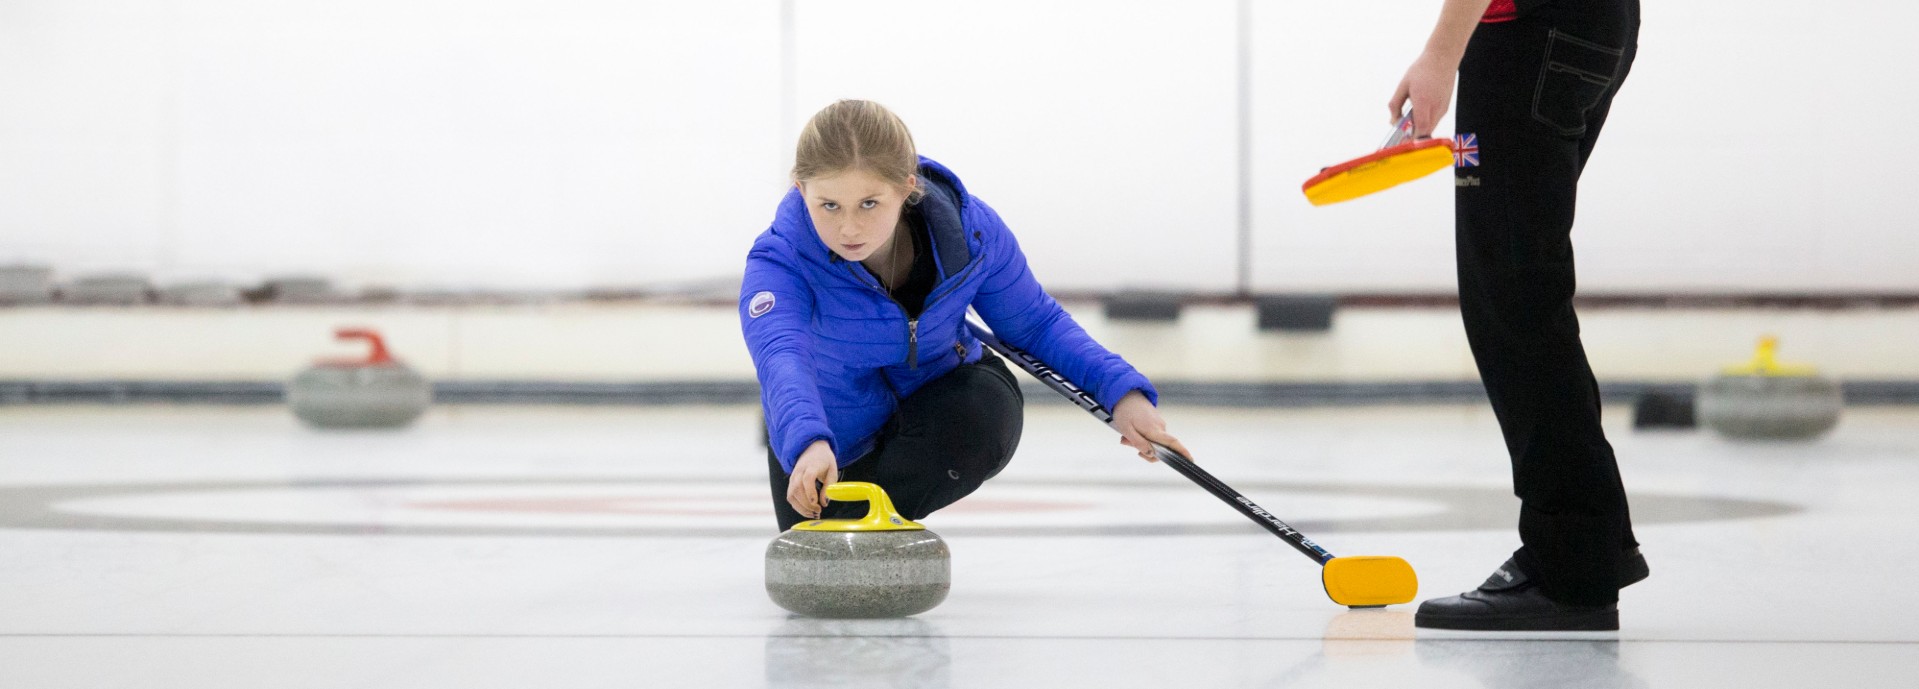 Sophie Jackson throwing curling stone banner